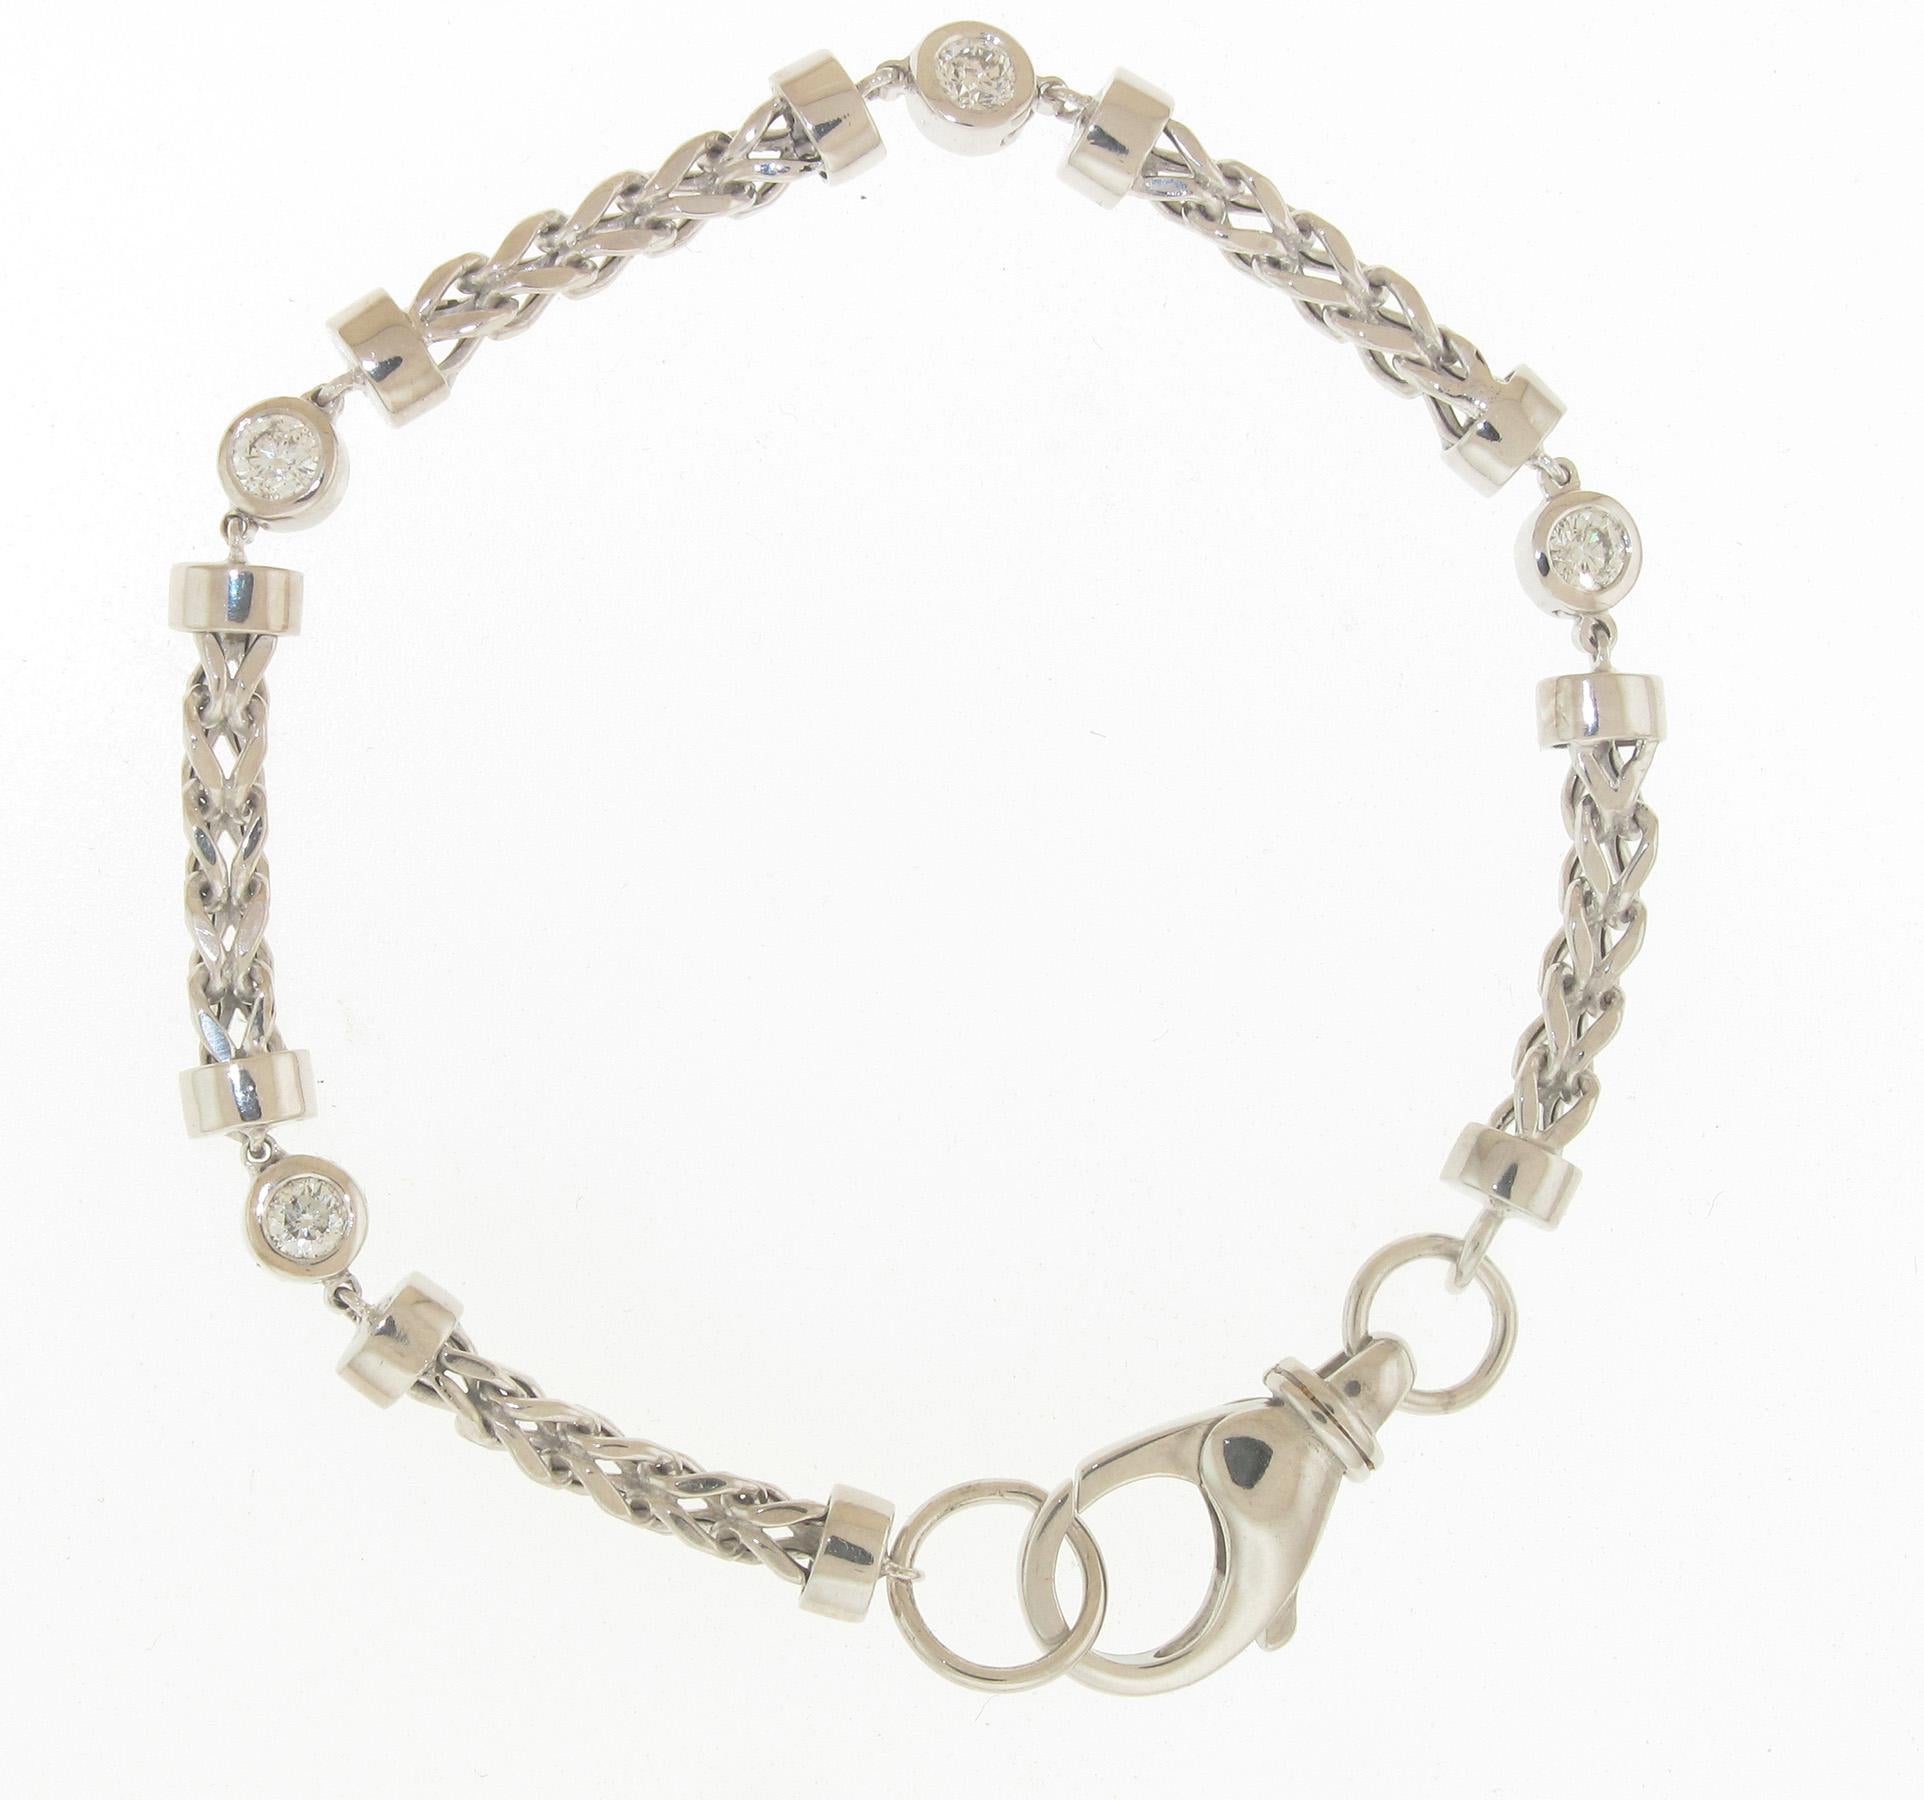 Bracelet in 14K white gold with alternating chain and bezel set round diamonds. D0.80ct.t.w.